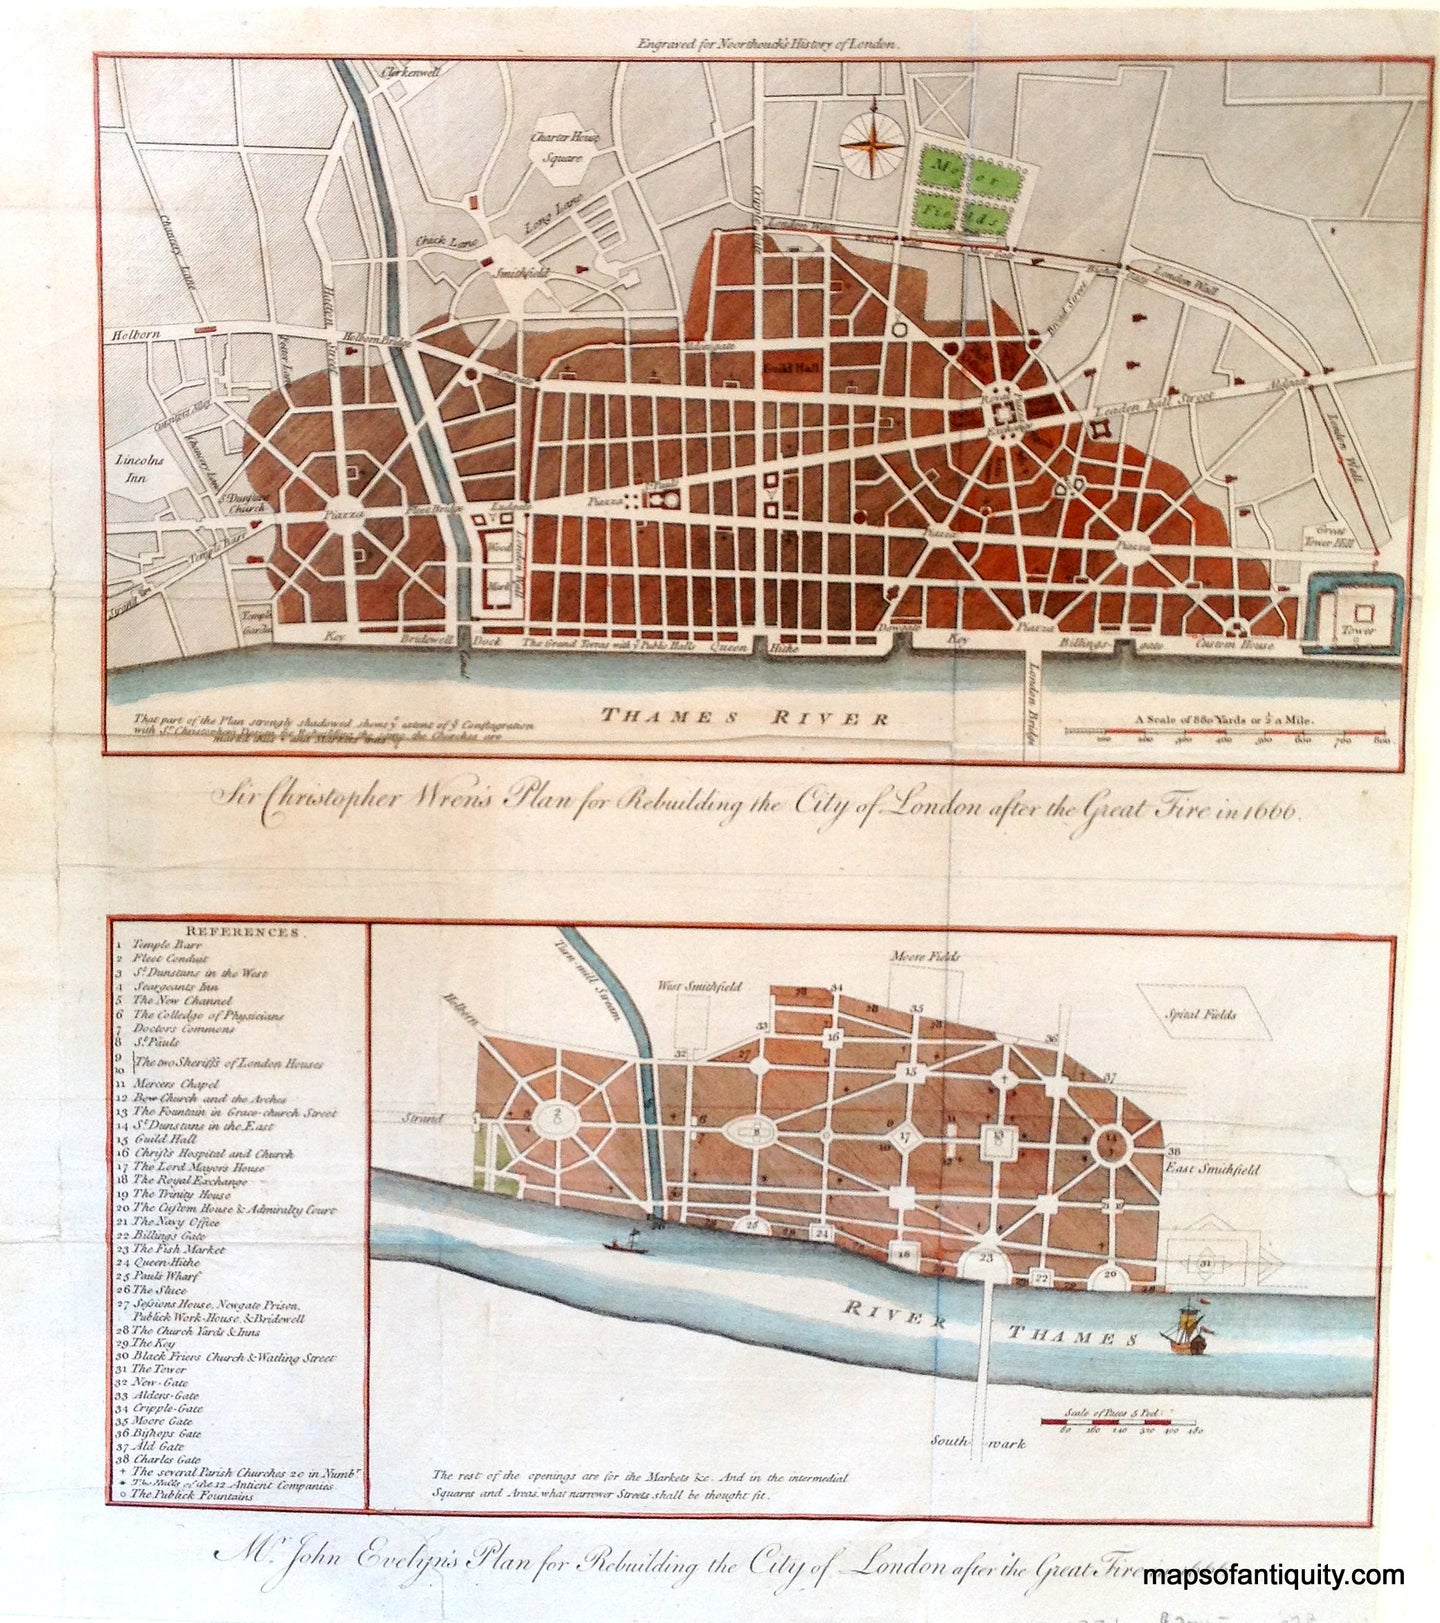 Antique-Hand-Colored-Map-Sir-Christopher-Wren's-Plan-for-Rebuilding-the-City-of-London-after-the-Great-Fire-in-1666/Mr.-John-Evelyn's-Plan-for-Rebuilding-the-City-of-London-after-the-Great-Fire-in-1666-******-Towns-and-Cities-Europe-1772-Noorthouck-Maps-Of-Antiquity